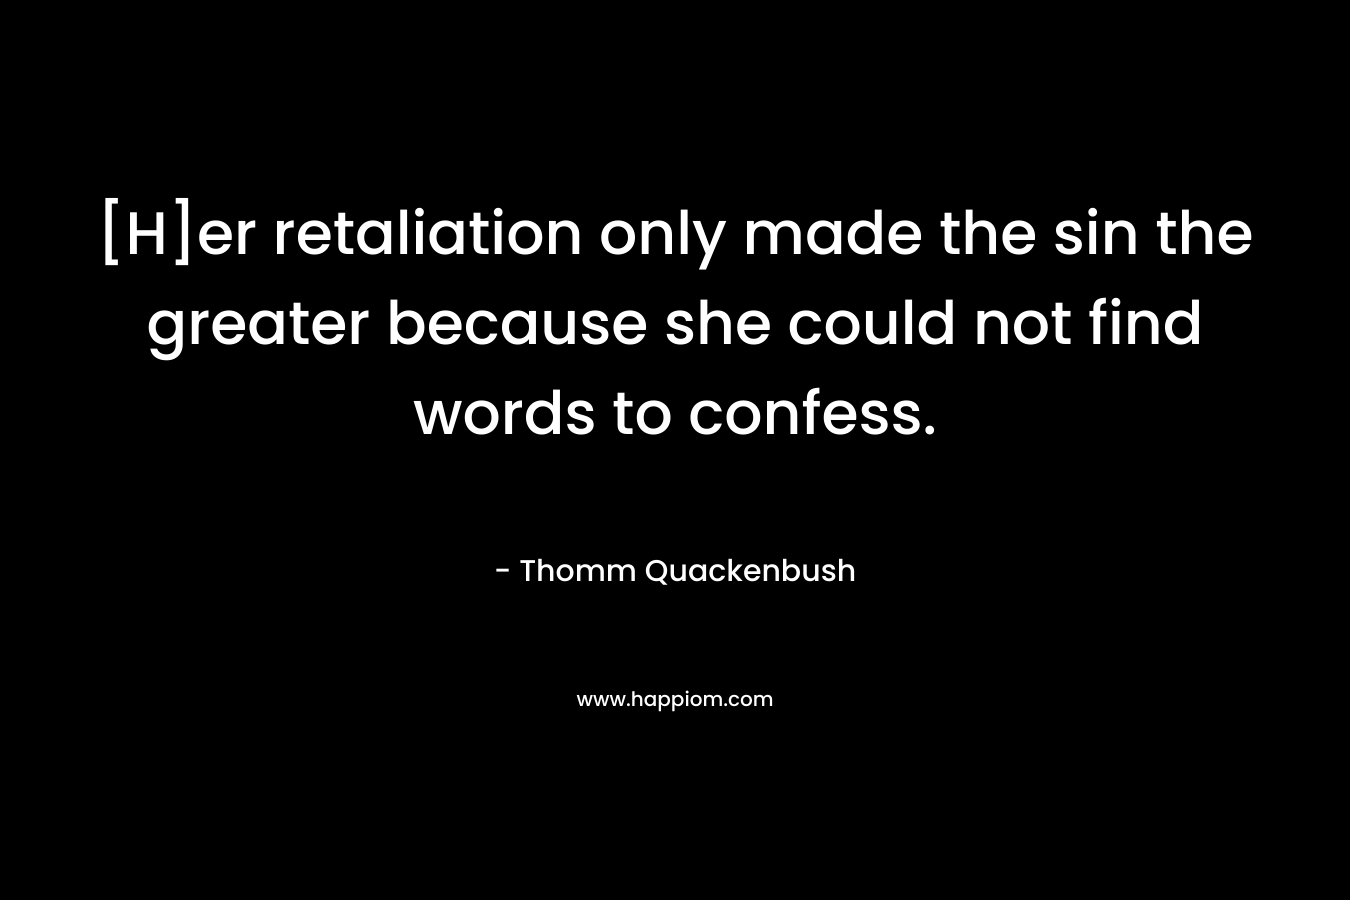 [H]er retaliation only made the sin the greater because she could not find words to confess. – Thomm Quackenbush